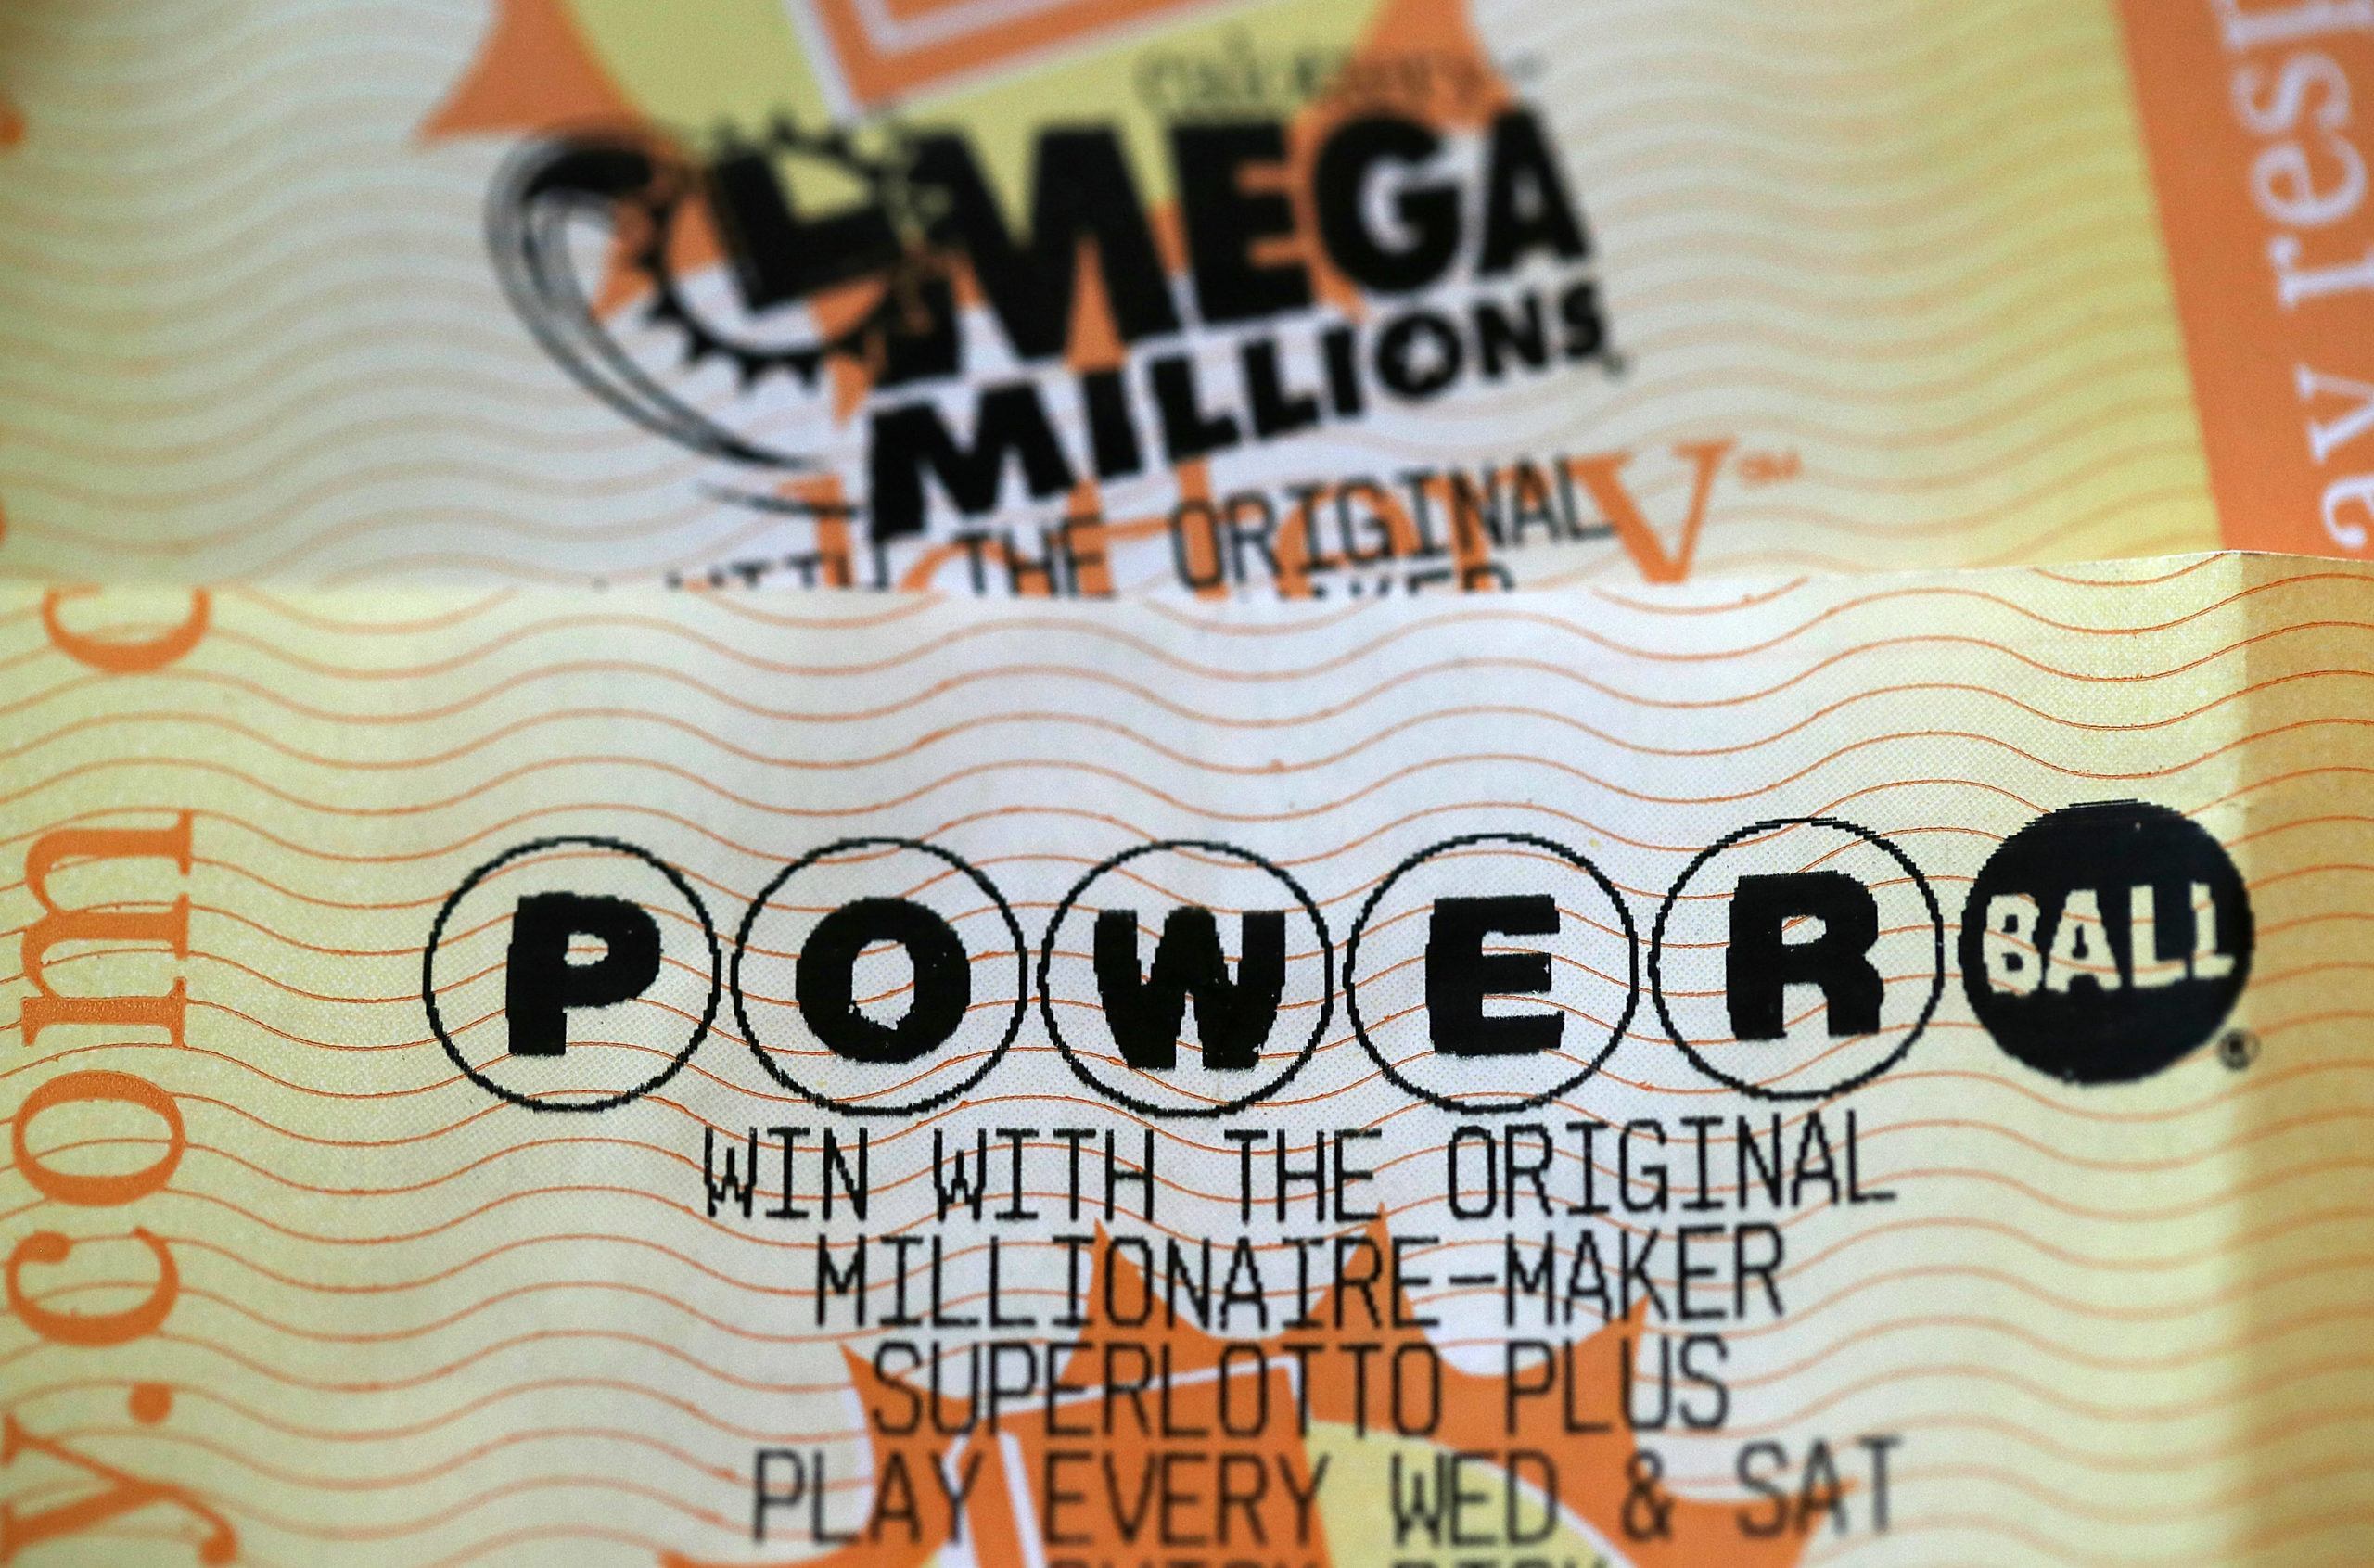 Mega Millions South Carolina Powerball!  They publish winning numbers of the drawing of September 29